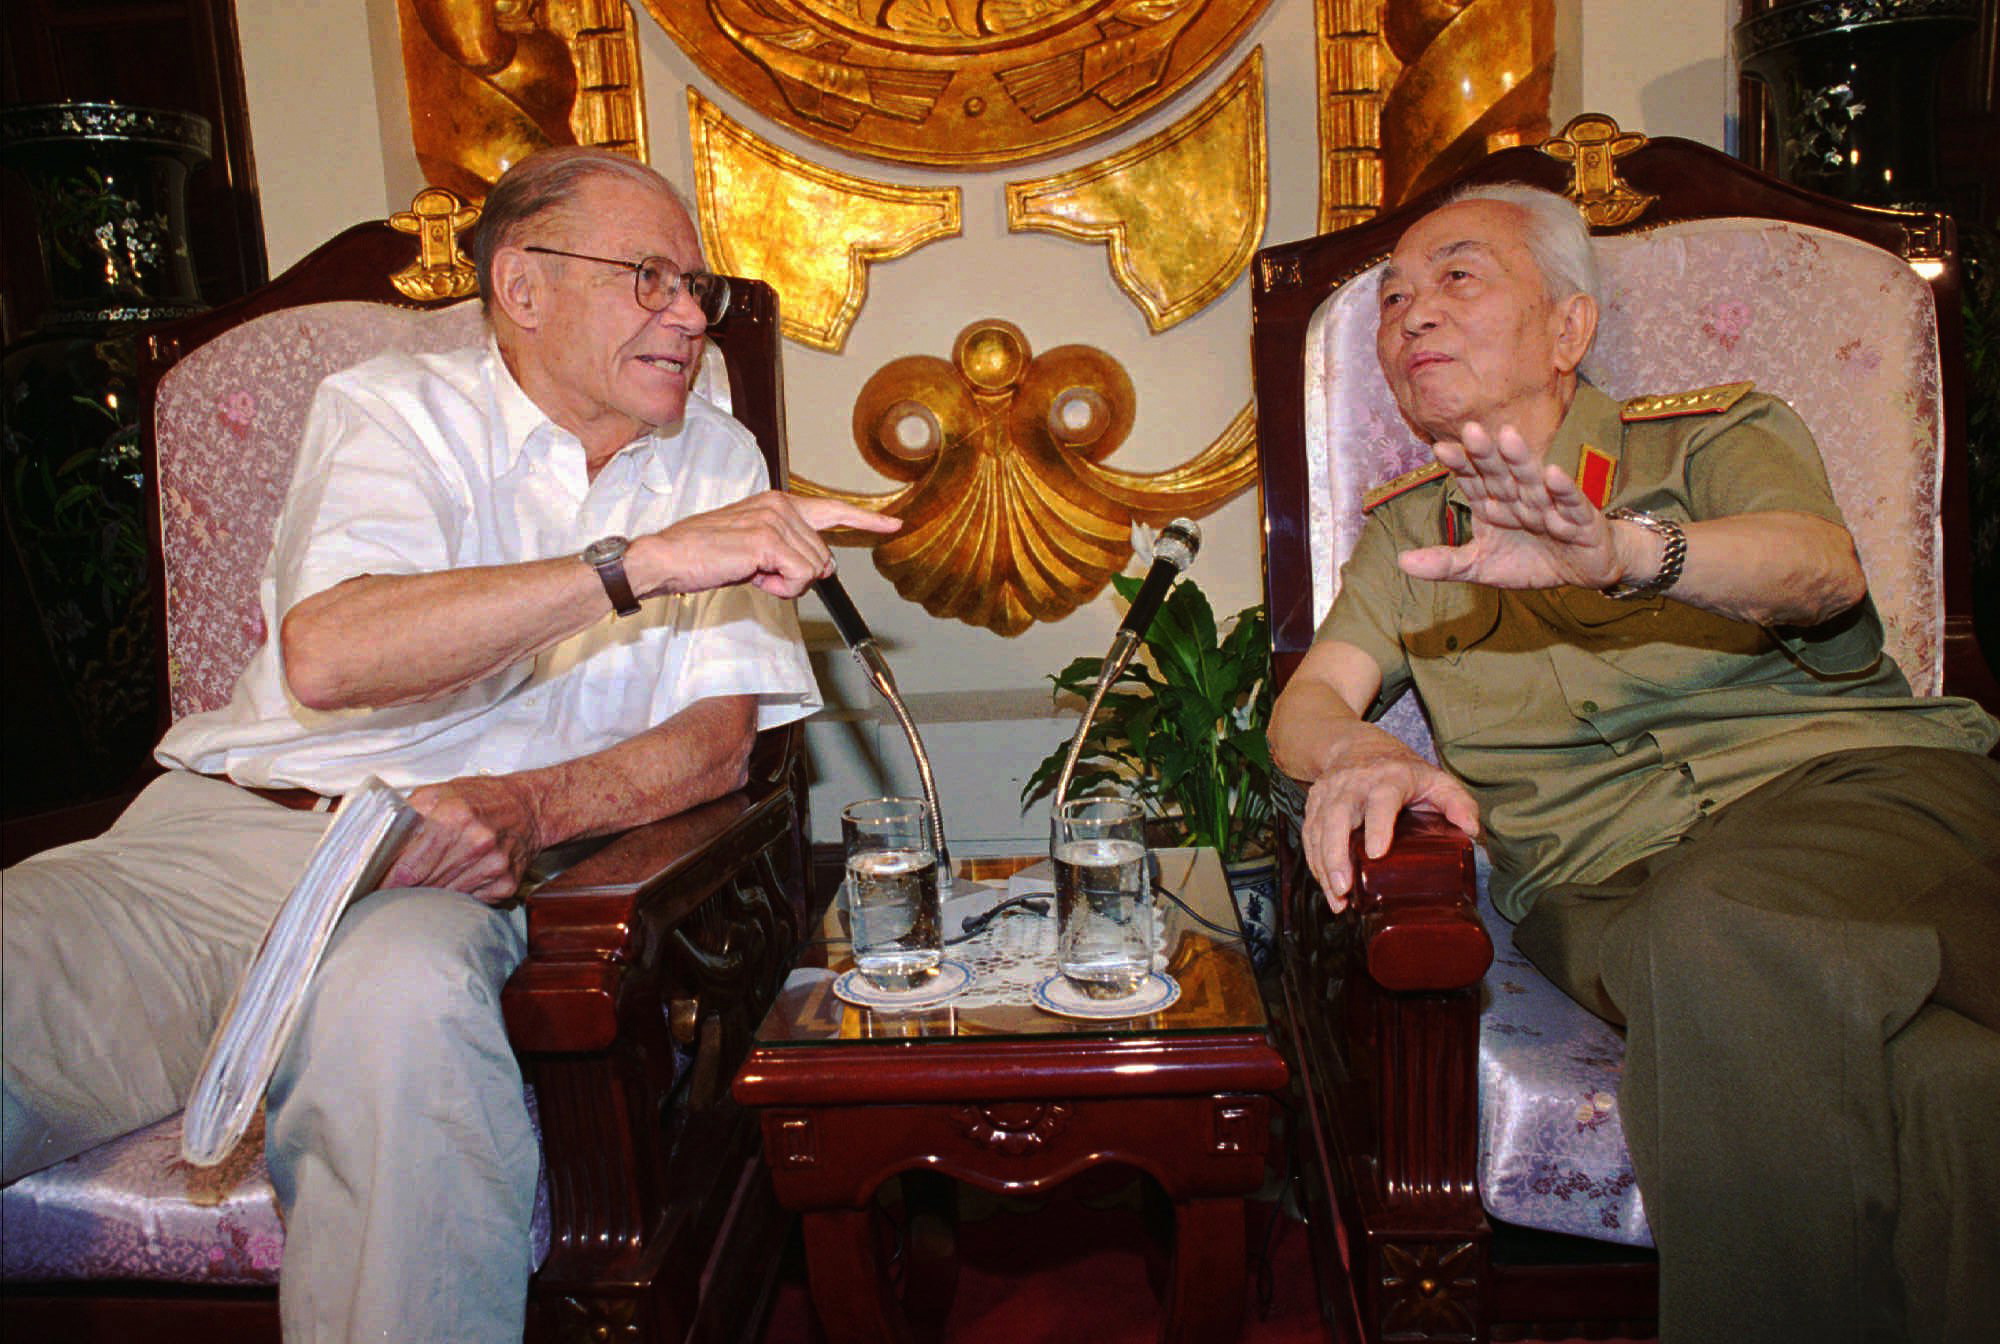 Former U.S. Defense Secretary Robert McNamara, left, speaks to his onetime foe Gen. Vo Nguyen Giap in Hanoi, Vietnam, on June 23, 1997. Officials say Giap, the military mastermind who drove the French and the Americans out of Vietnam, died at a Hanoi hospital Friday at age 102. He was the country's last famous communist revolutionary, and used ingenious guerrilla tactics to overcome enormous odds against superior forces.